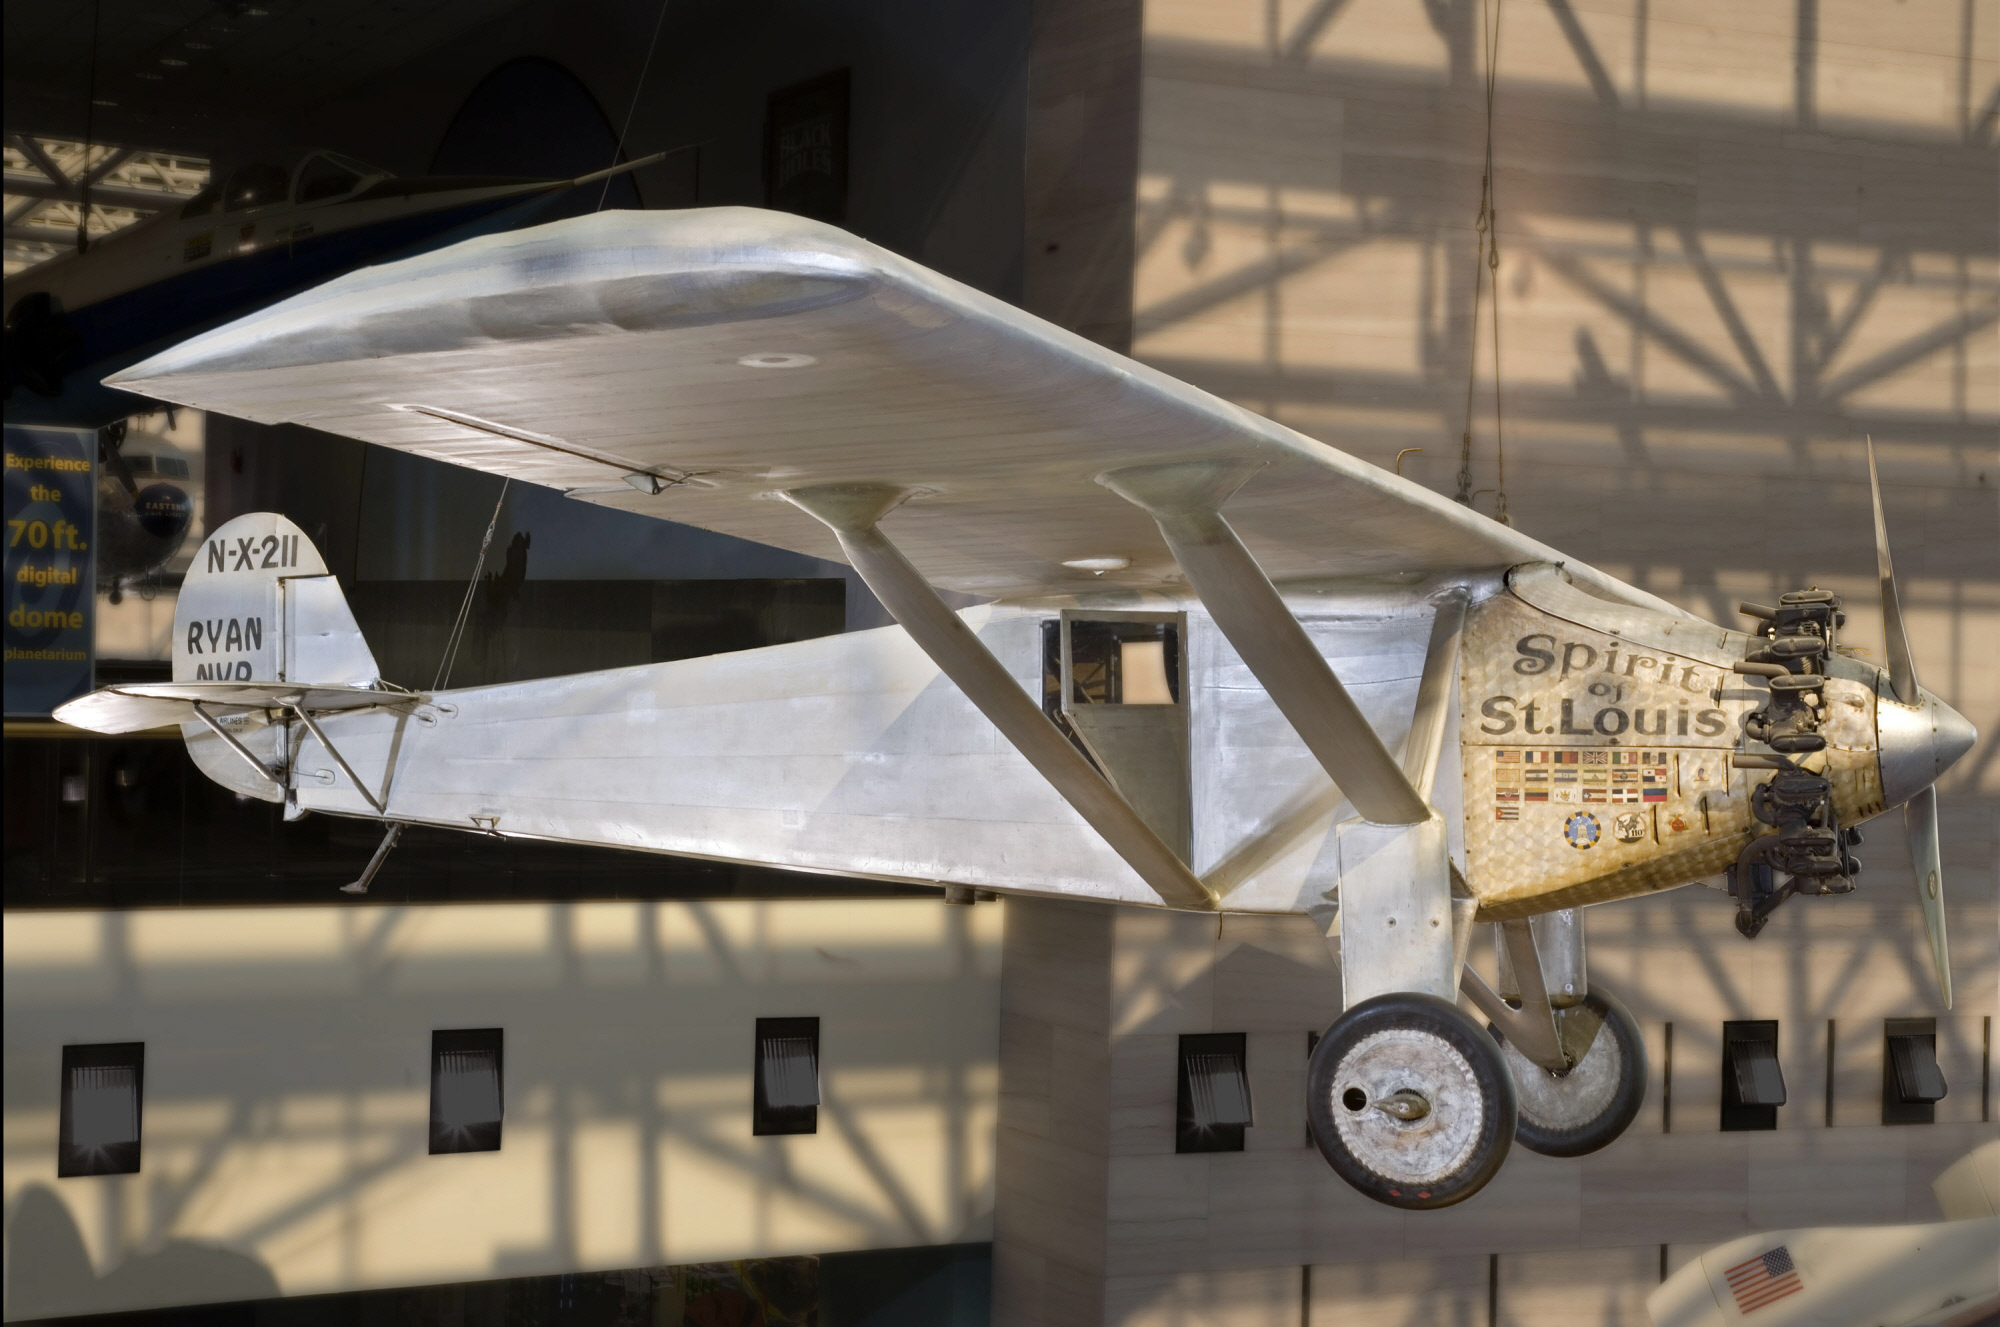 The Ryan NYP Spirit of St. Louis, NX211, on display at the Smithsonian Institution National Air and Space Museum